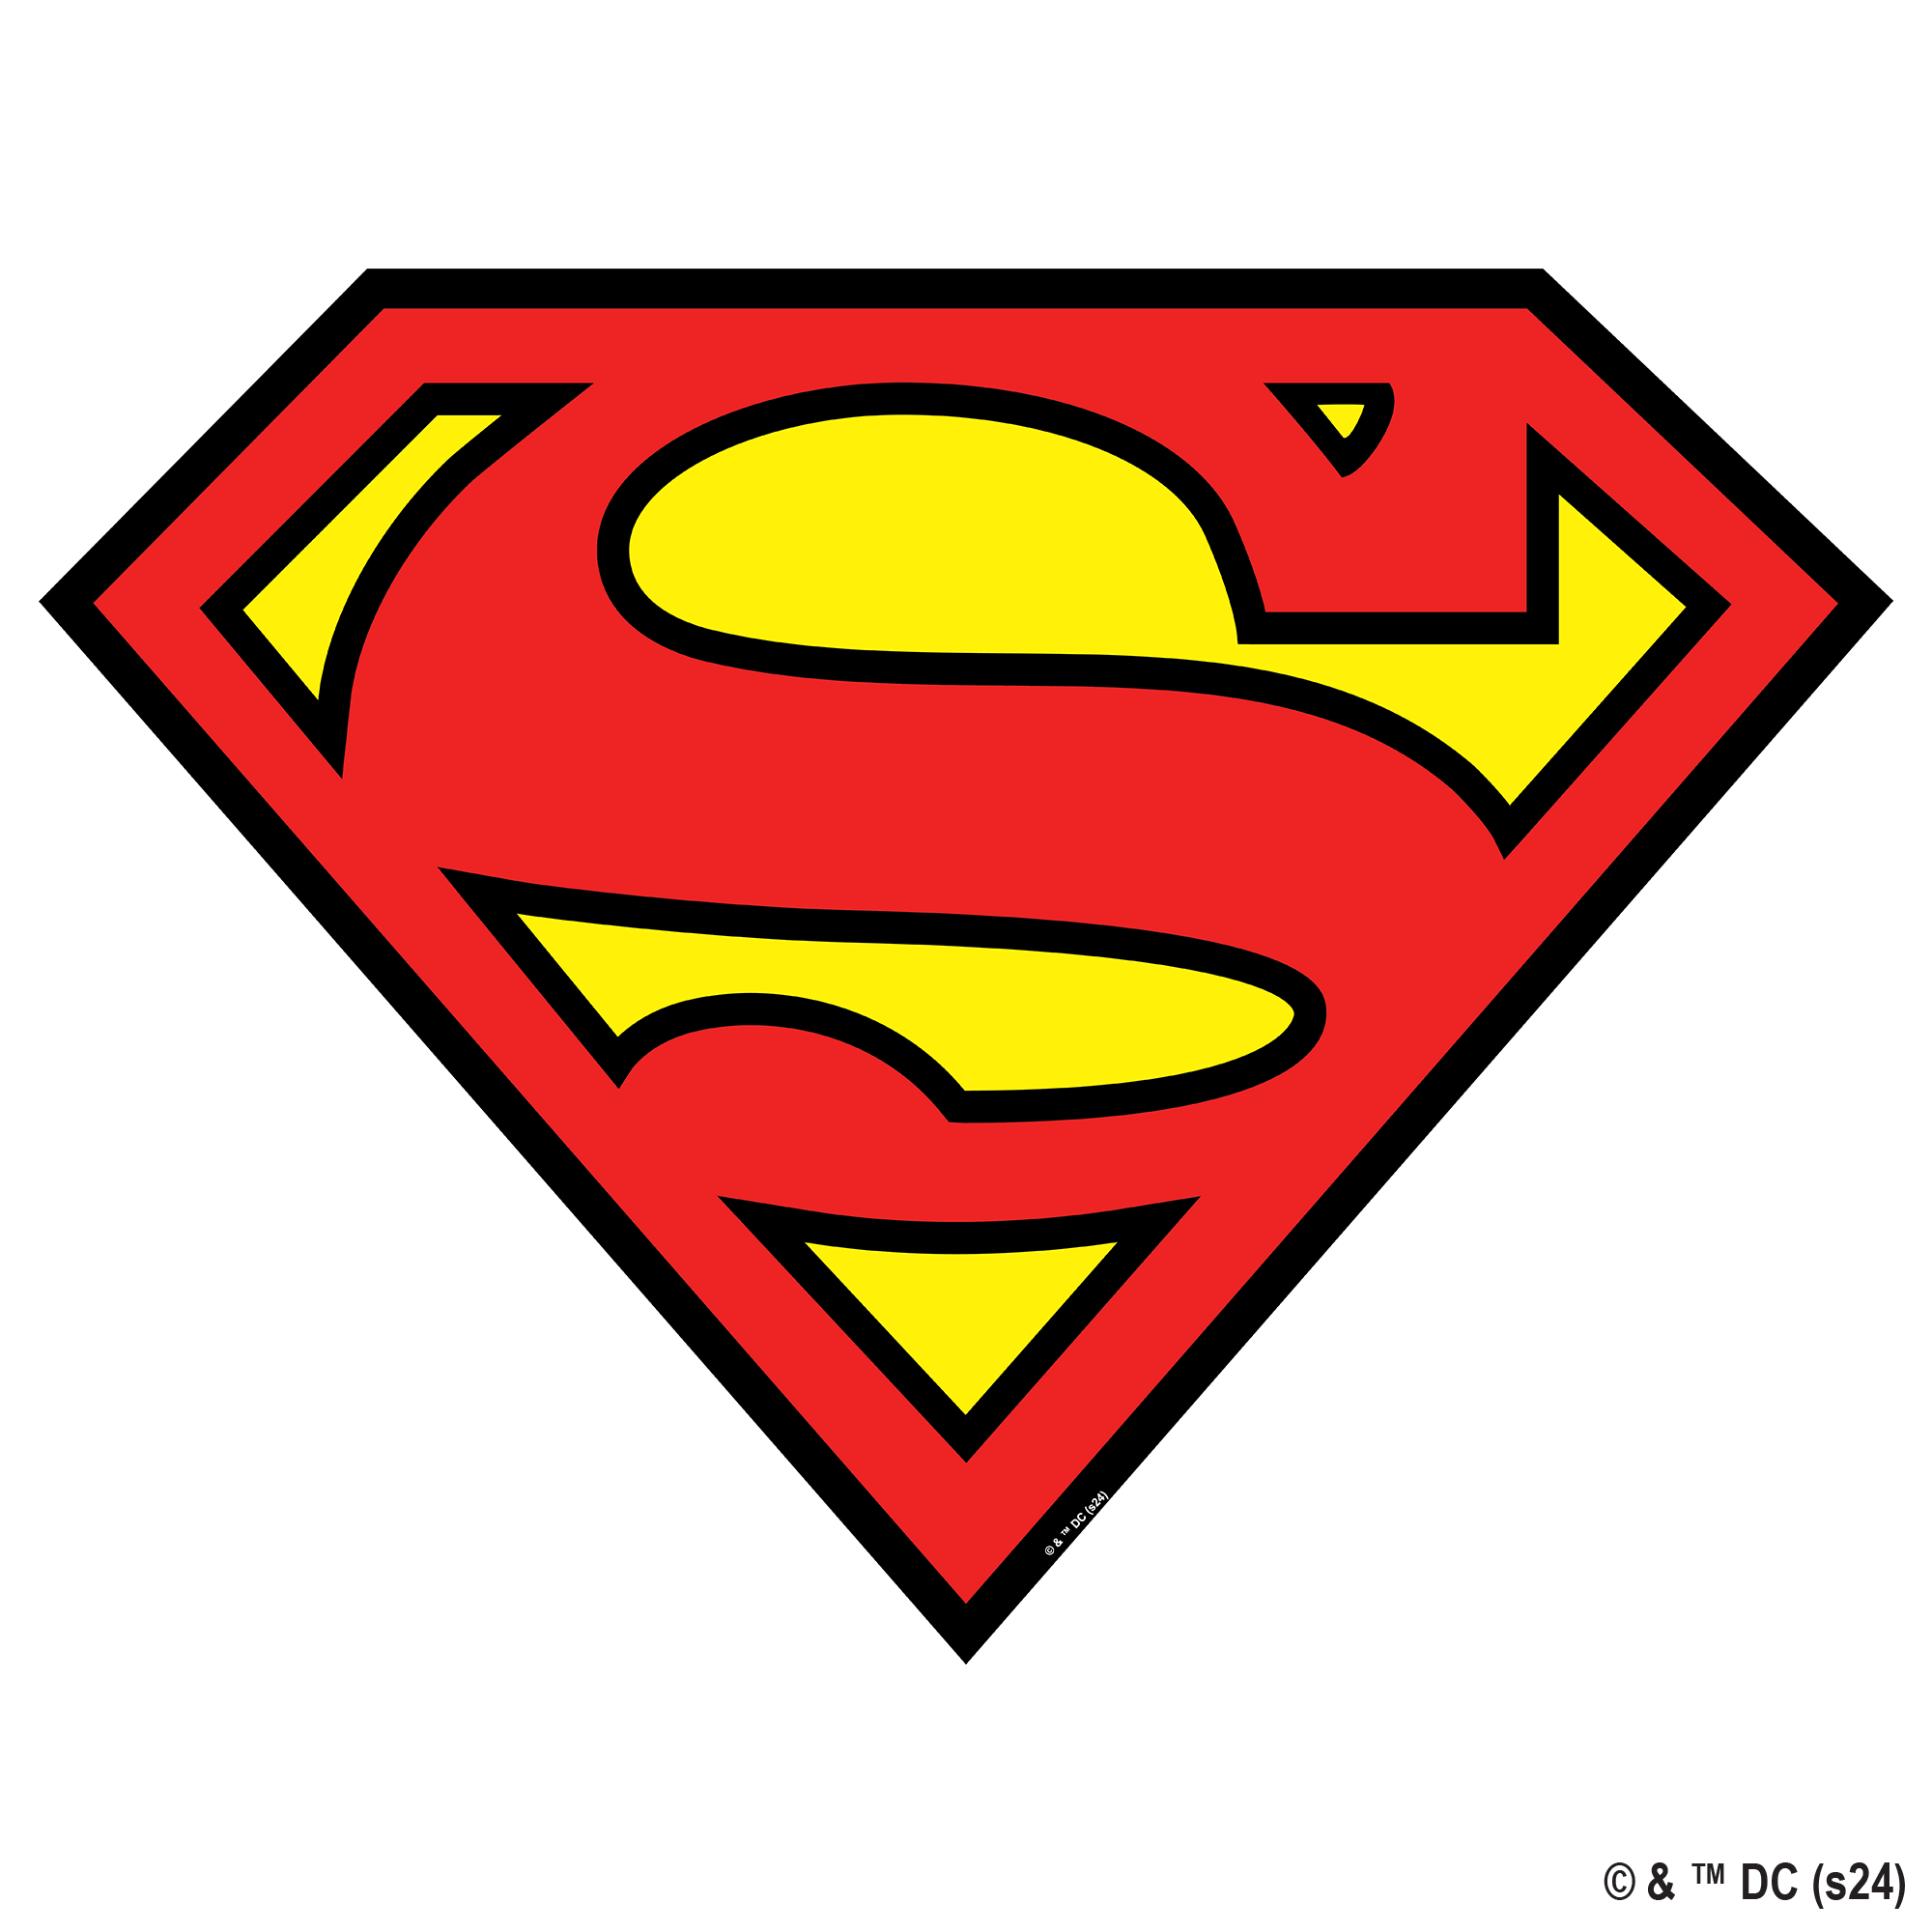 Animal Jigsaw Puzzle > Wooden Jigsaw Puzzle > Jigsaw Puzzle Superman Logo Wooden Jigsaw Puzzle